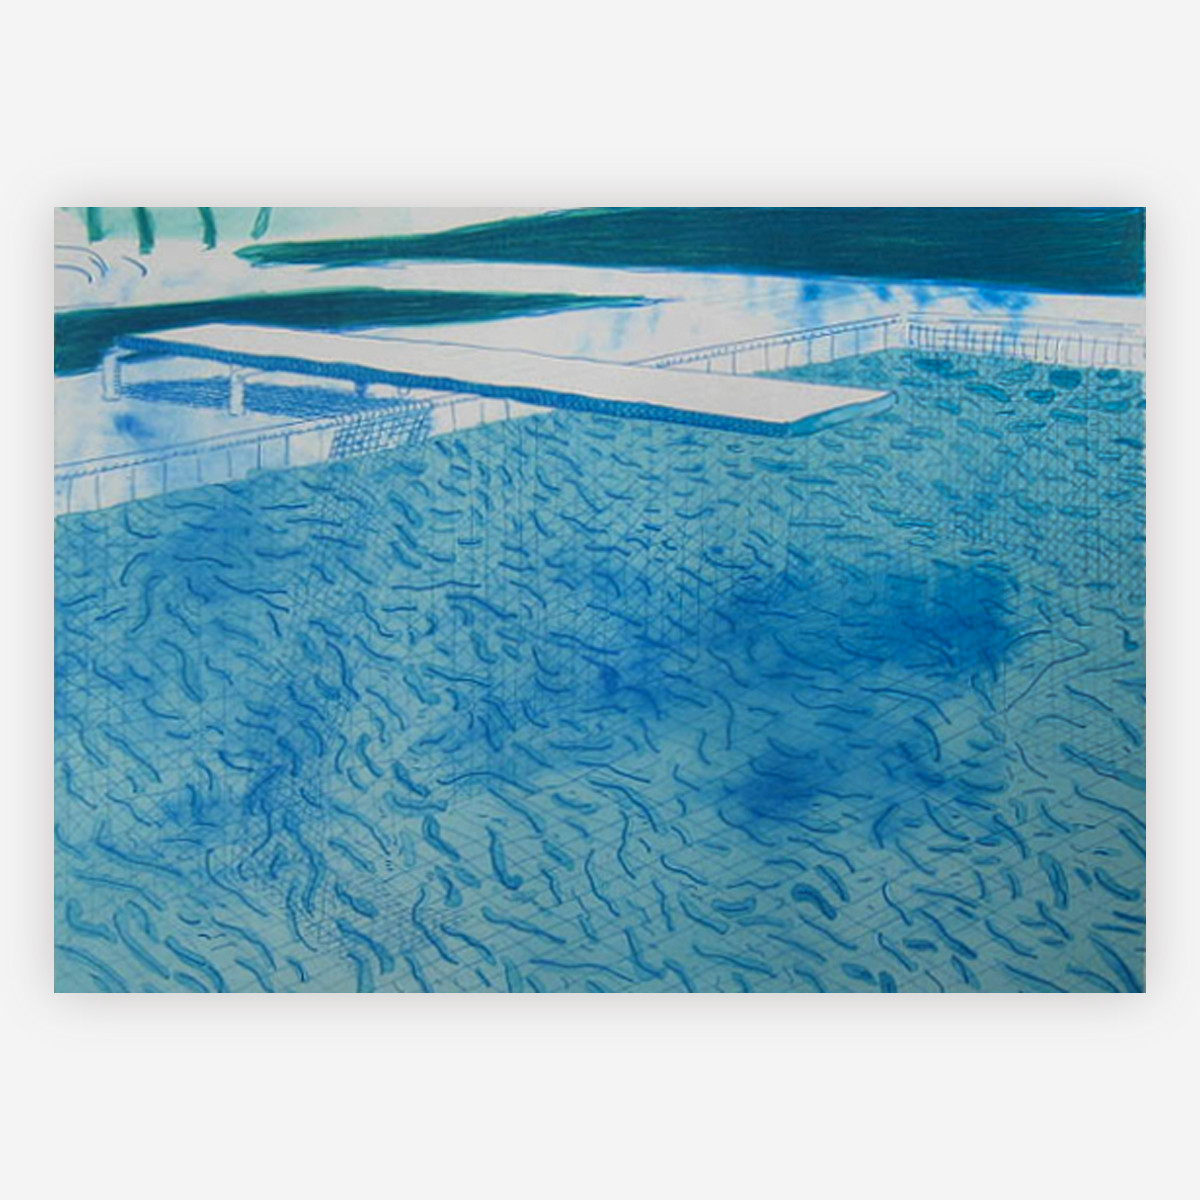 Water Made of Lines and a Blue Wash